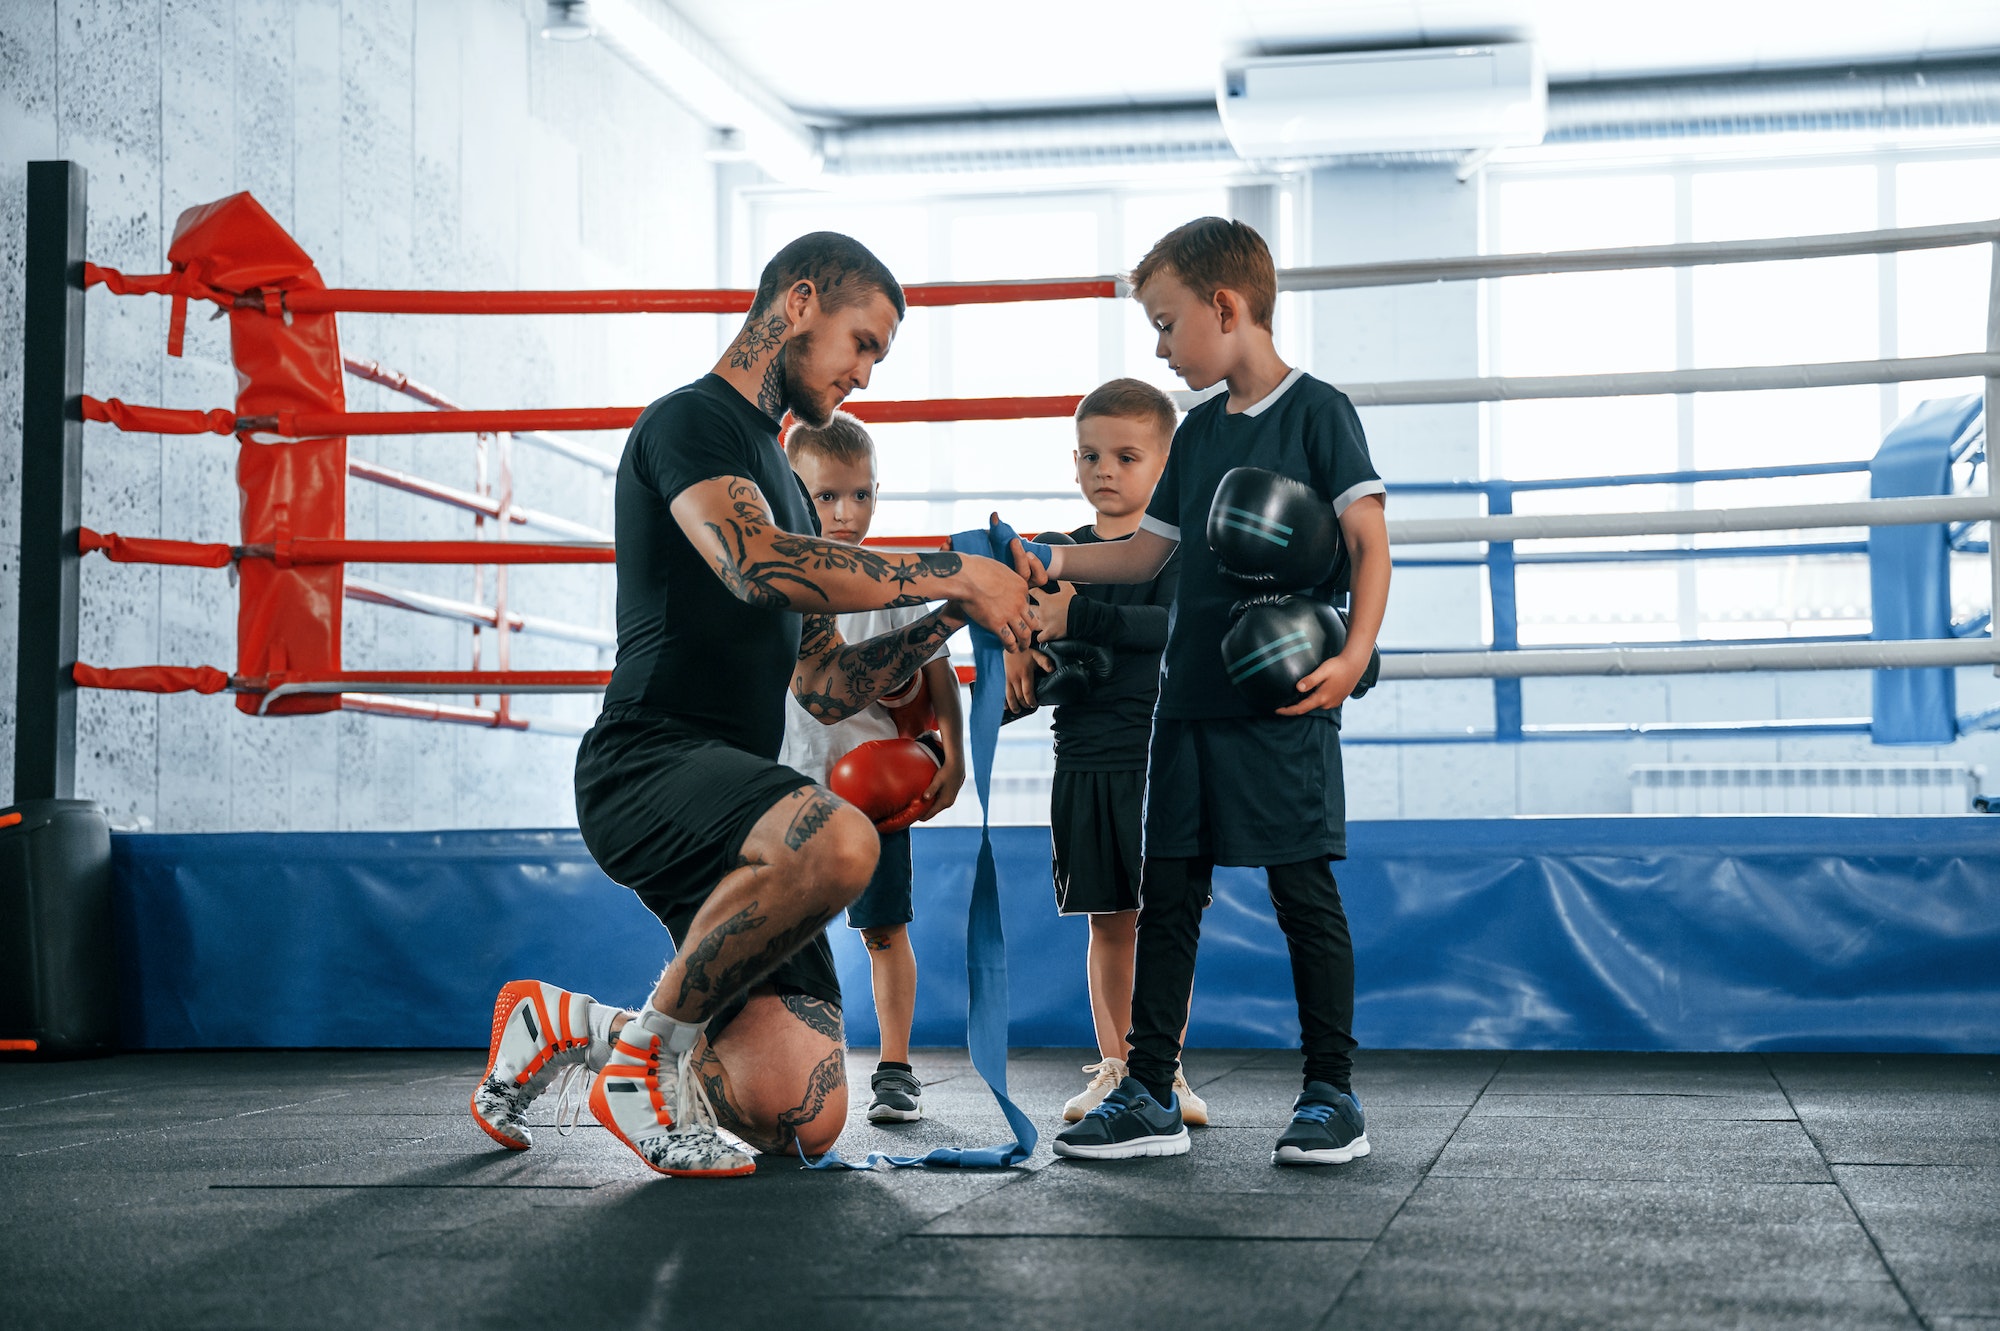 Wearing blue hand wraps. Young tattooed coach teaching the kids boxing techniques